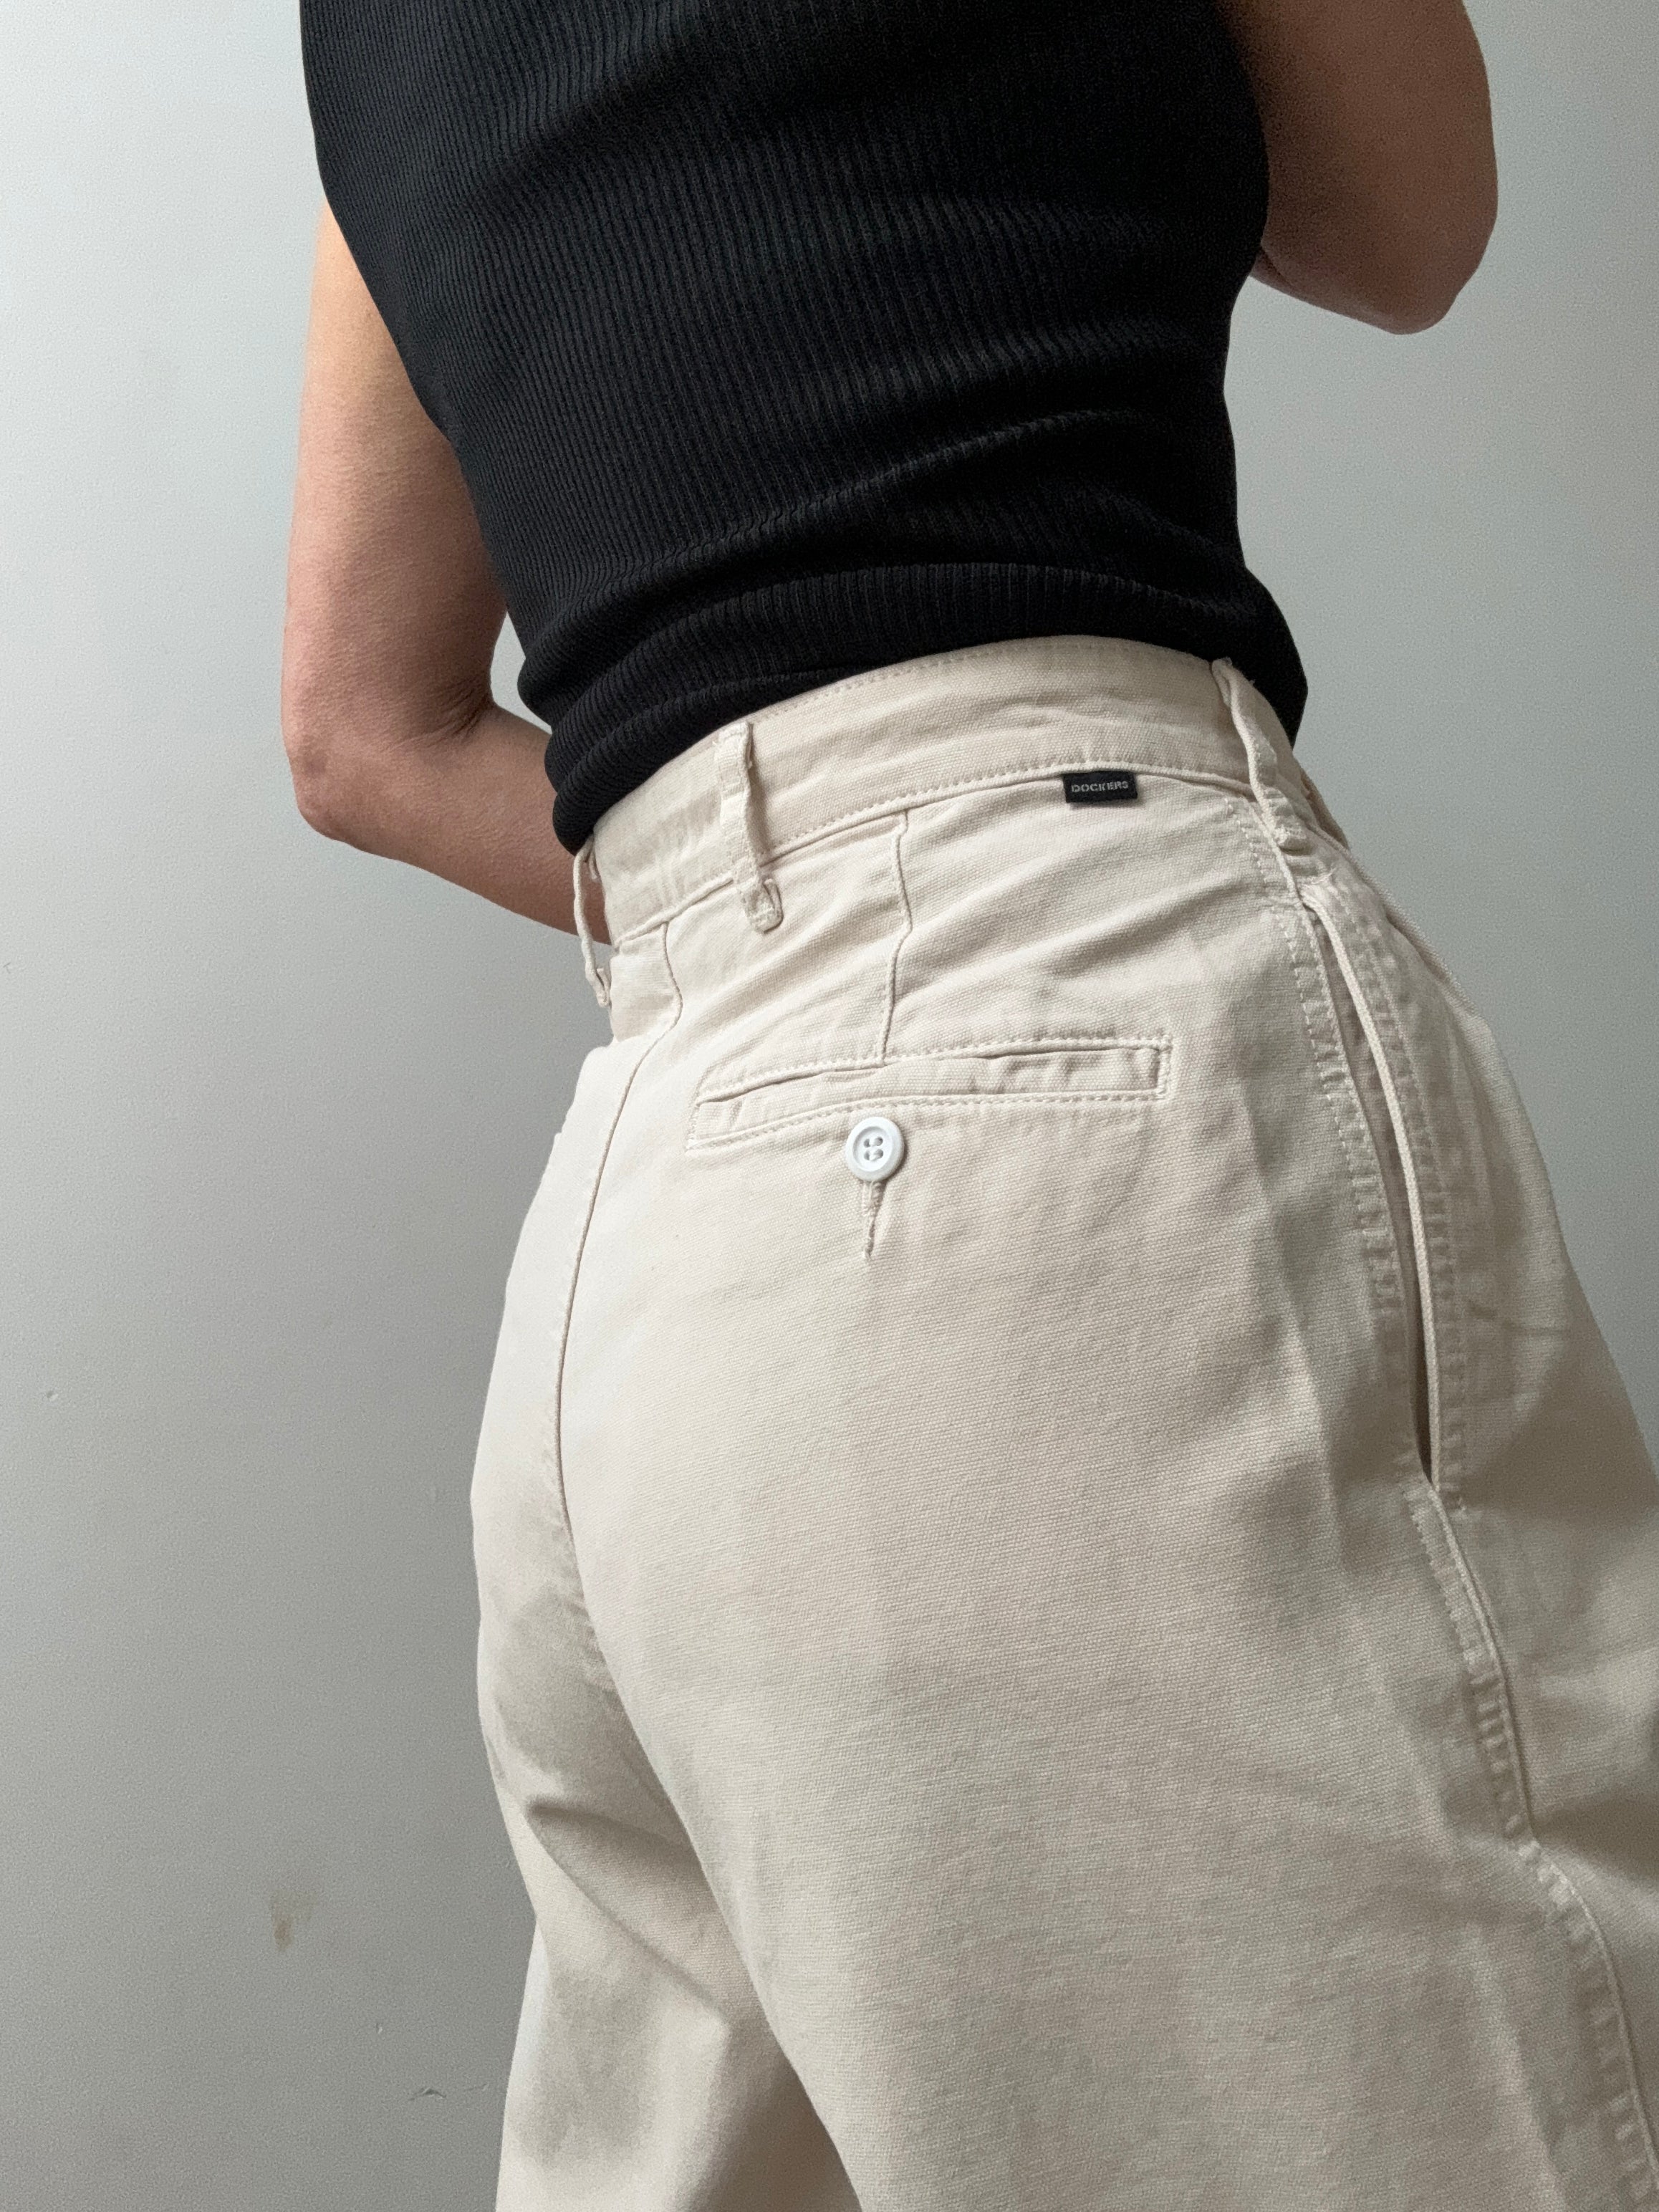 Dockers D3 Original Khaki Classic Fit Flat Front • Rocky Mountain  Connection · Clothing · Gear